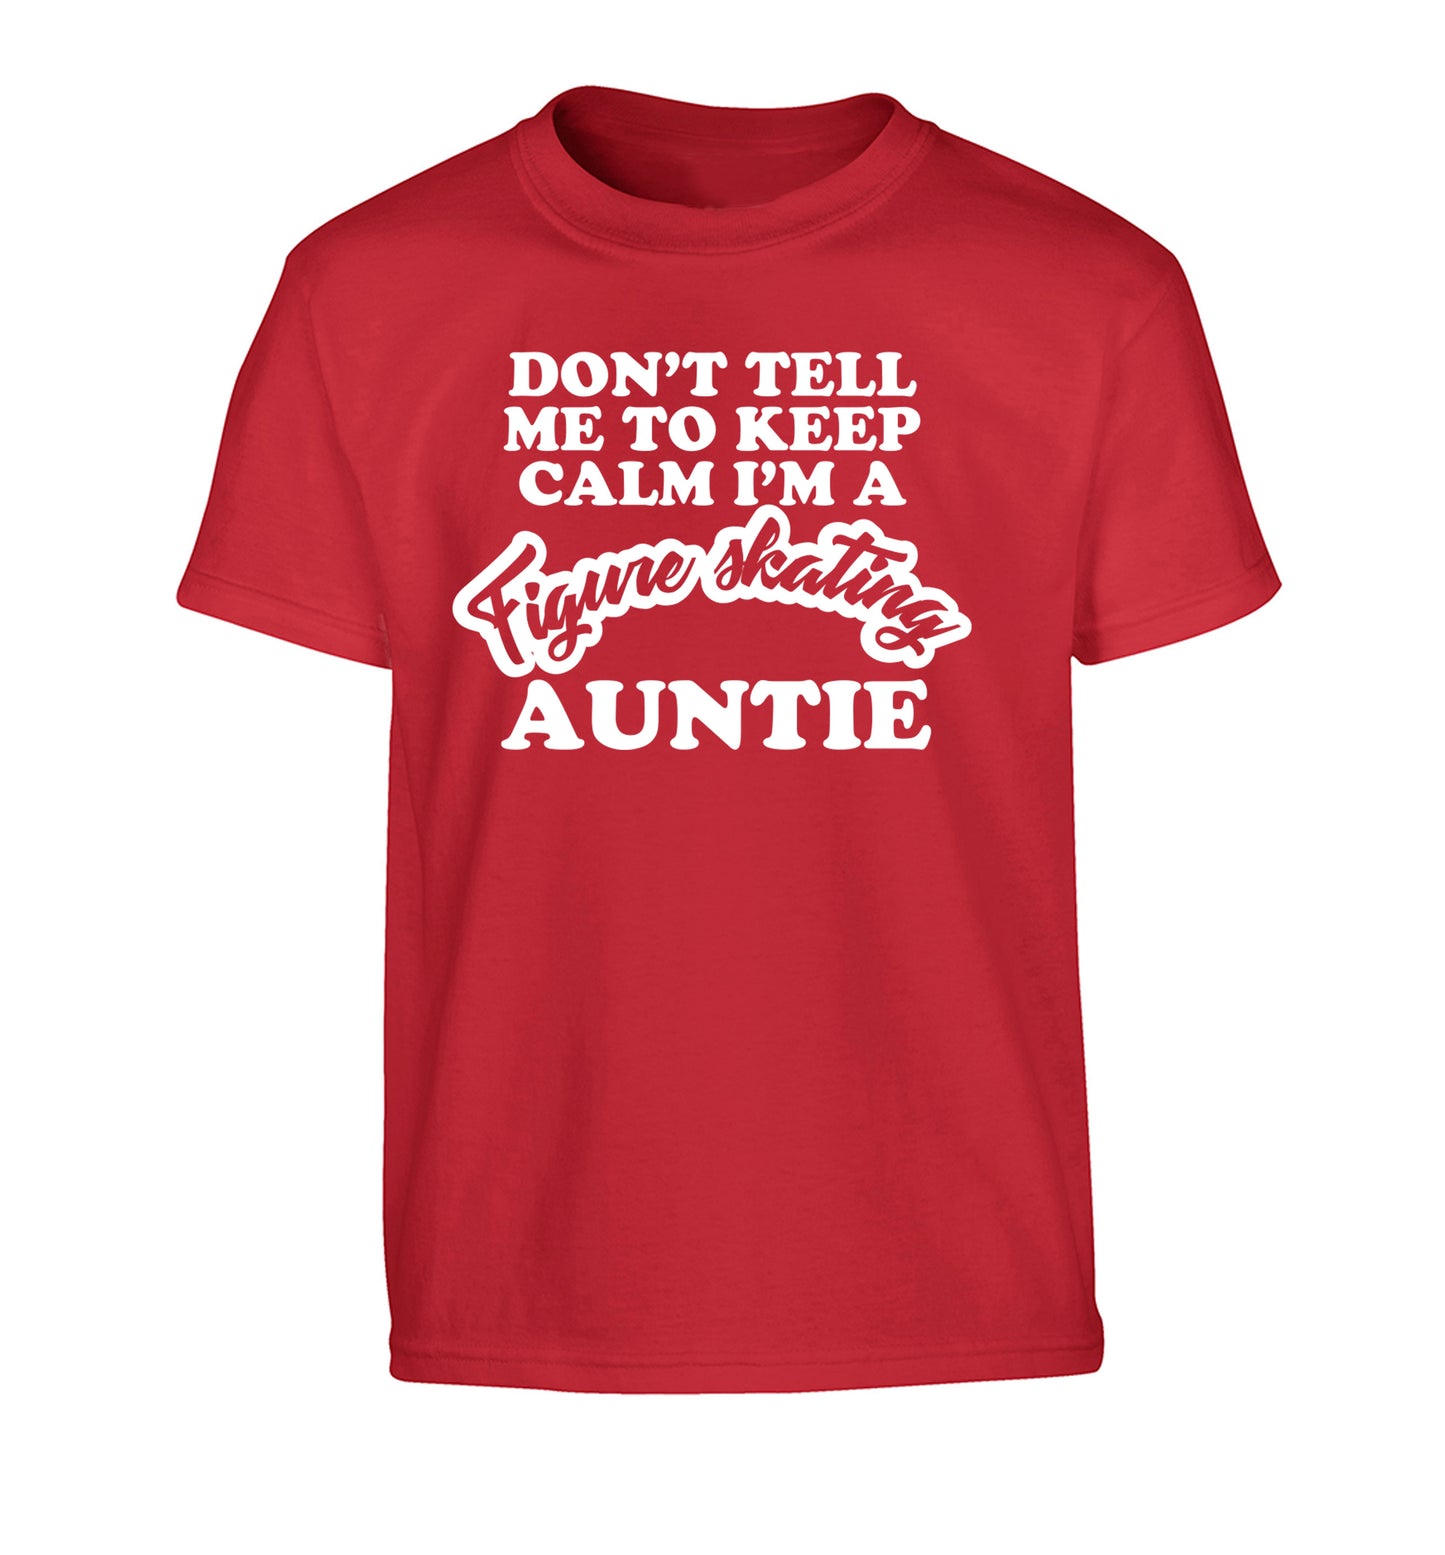 Don't tell me to keep calm I'm a figure skating auntie Children's red Tshirt 12-14 Years